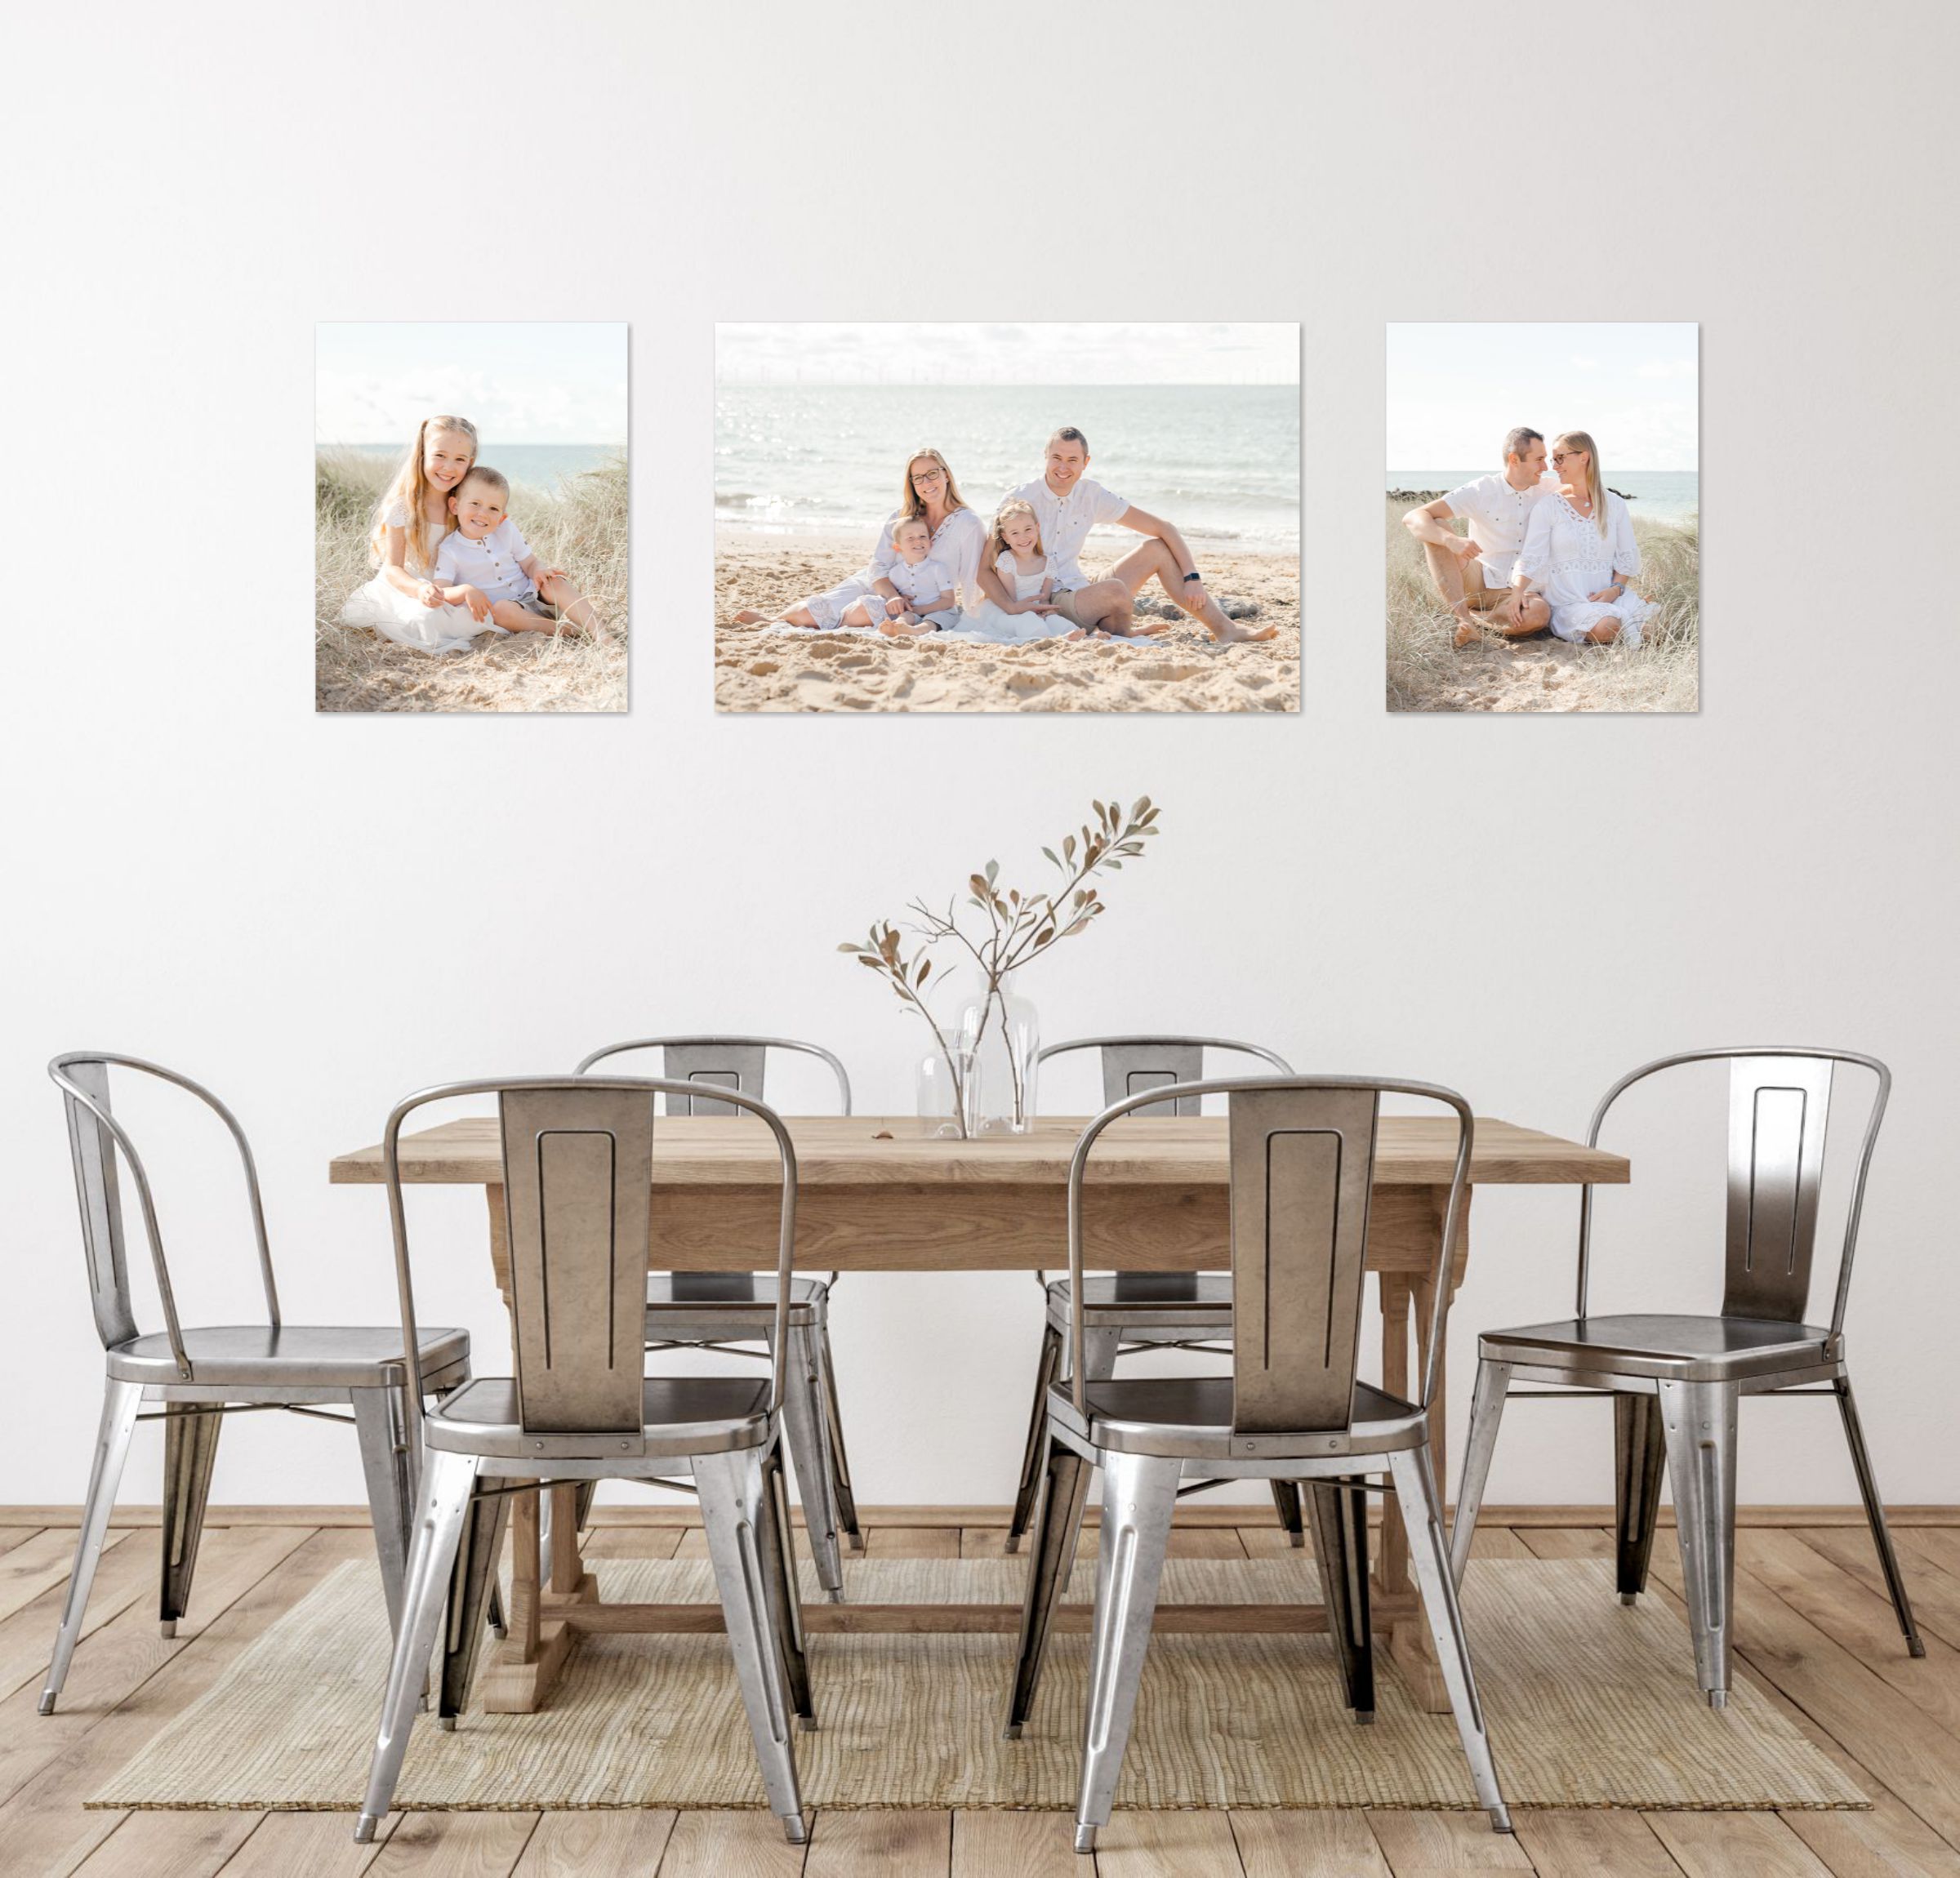 family PHOTOSHOOT FROM COLCHESTER BEACH AS A set of 3 WALL ART IN dining room